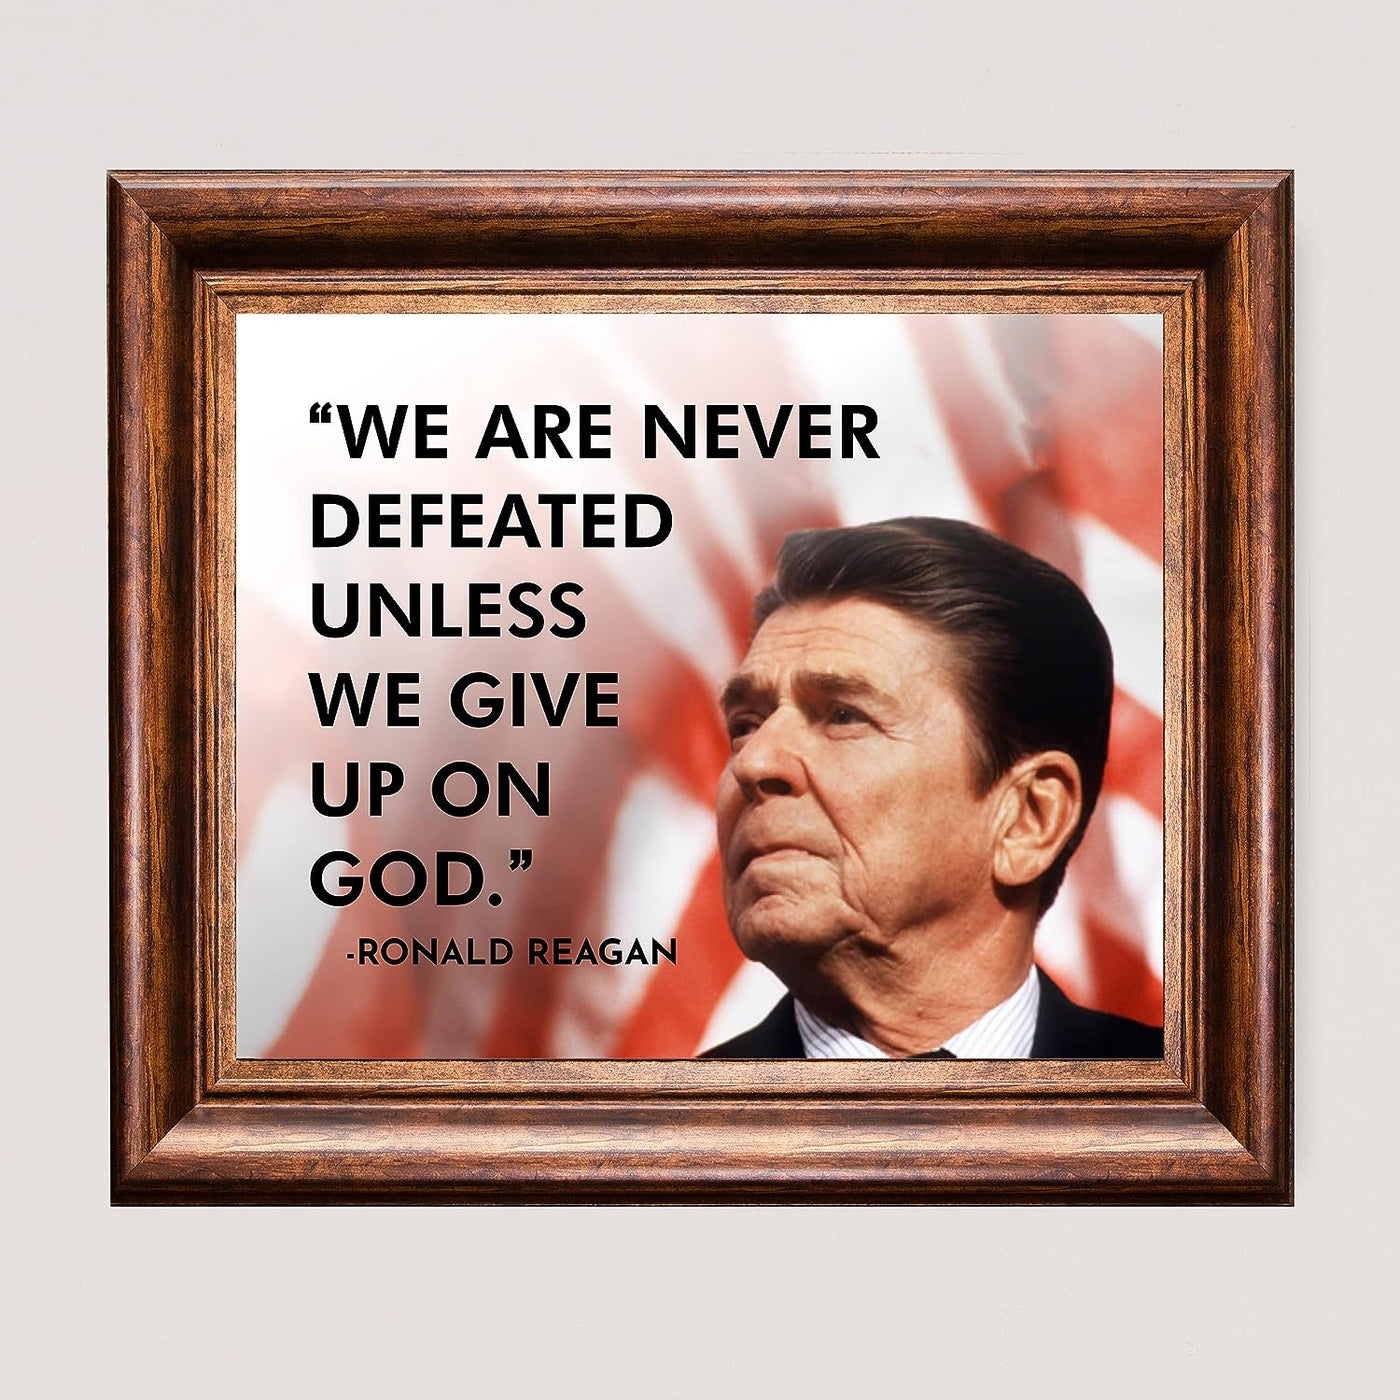 Ronald Reagan Quotes Wall Art-"We Are Never Defeated Unless We Give Up On God"- 10 x 8" Presidential Portrait Print-Ready to Frame. American Flag Decor for Home-Office-Library. Great Patriotic Gift.